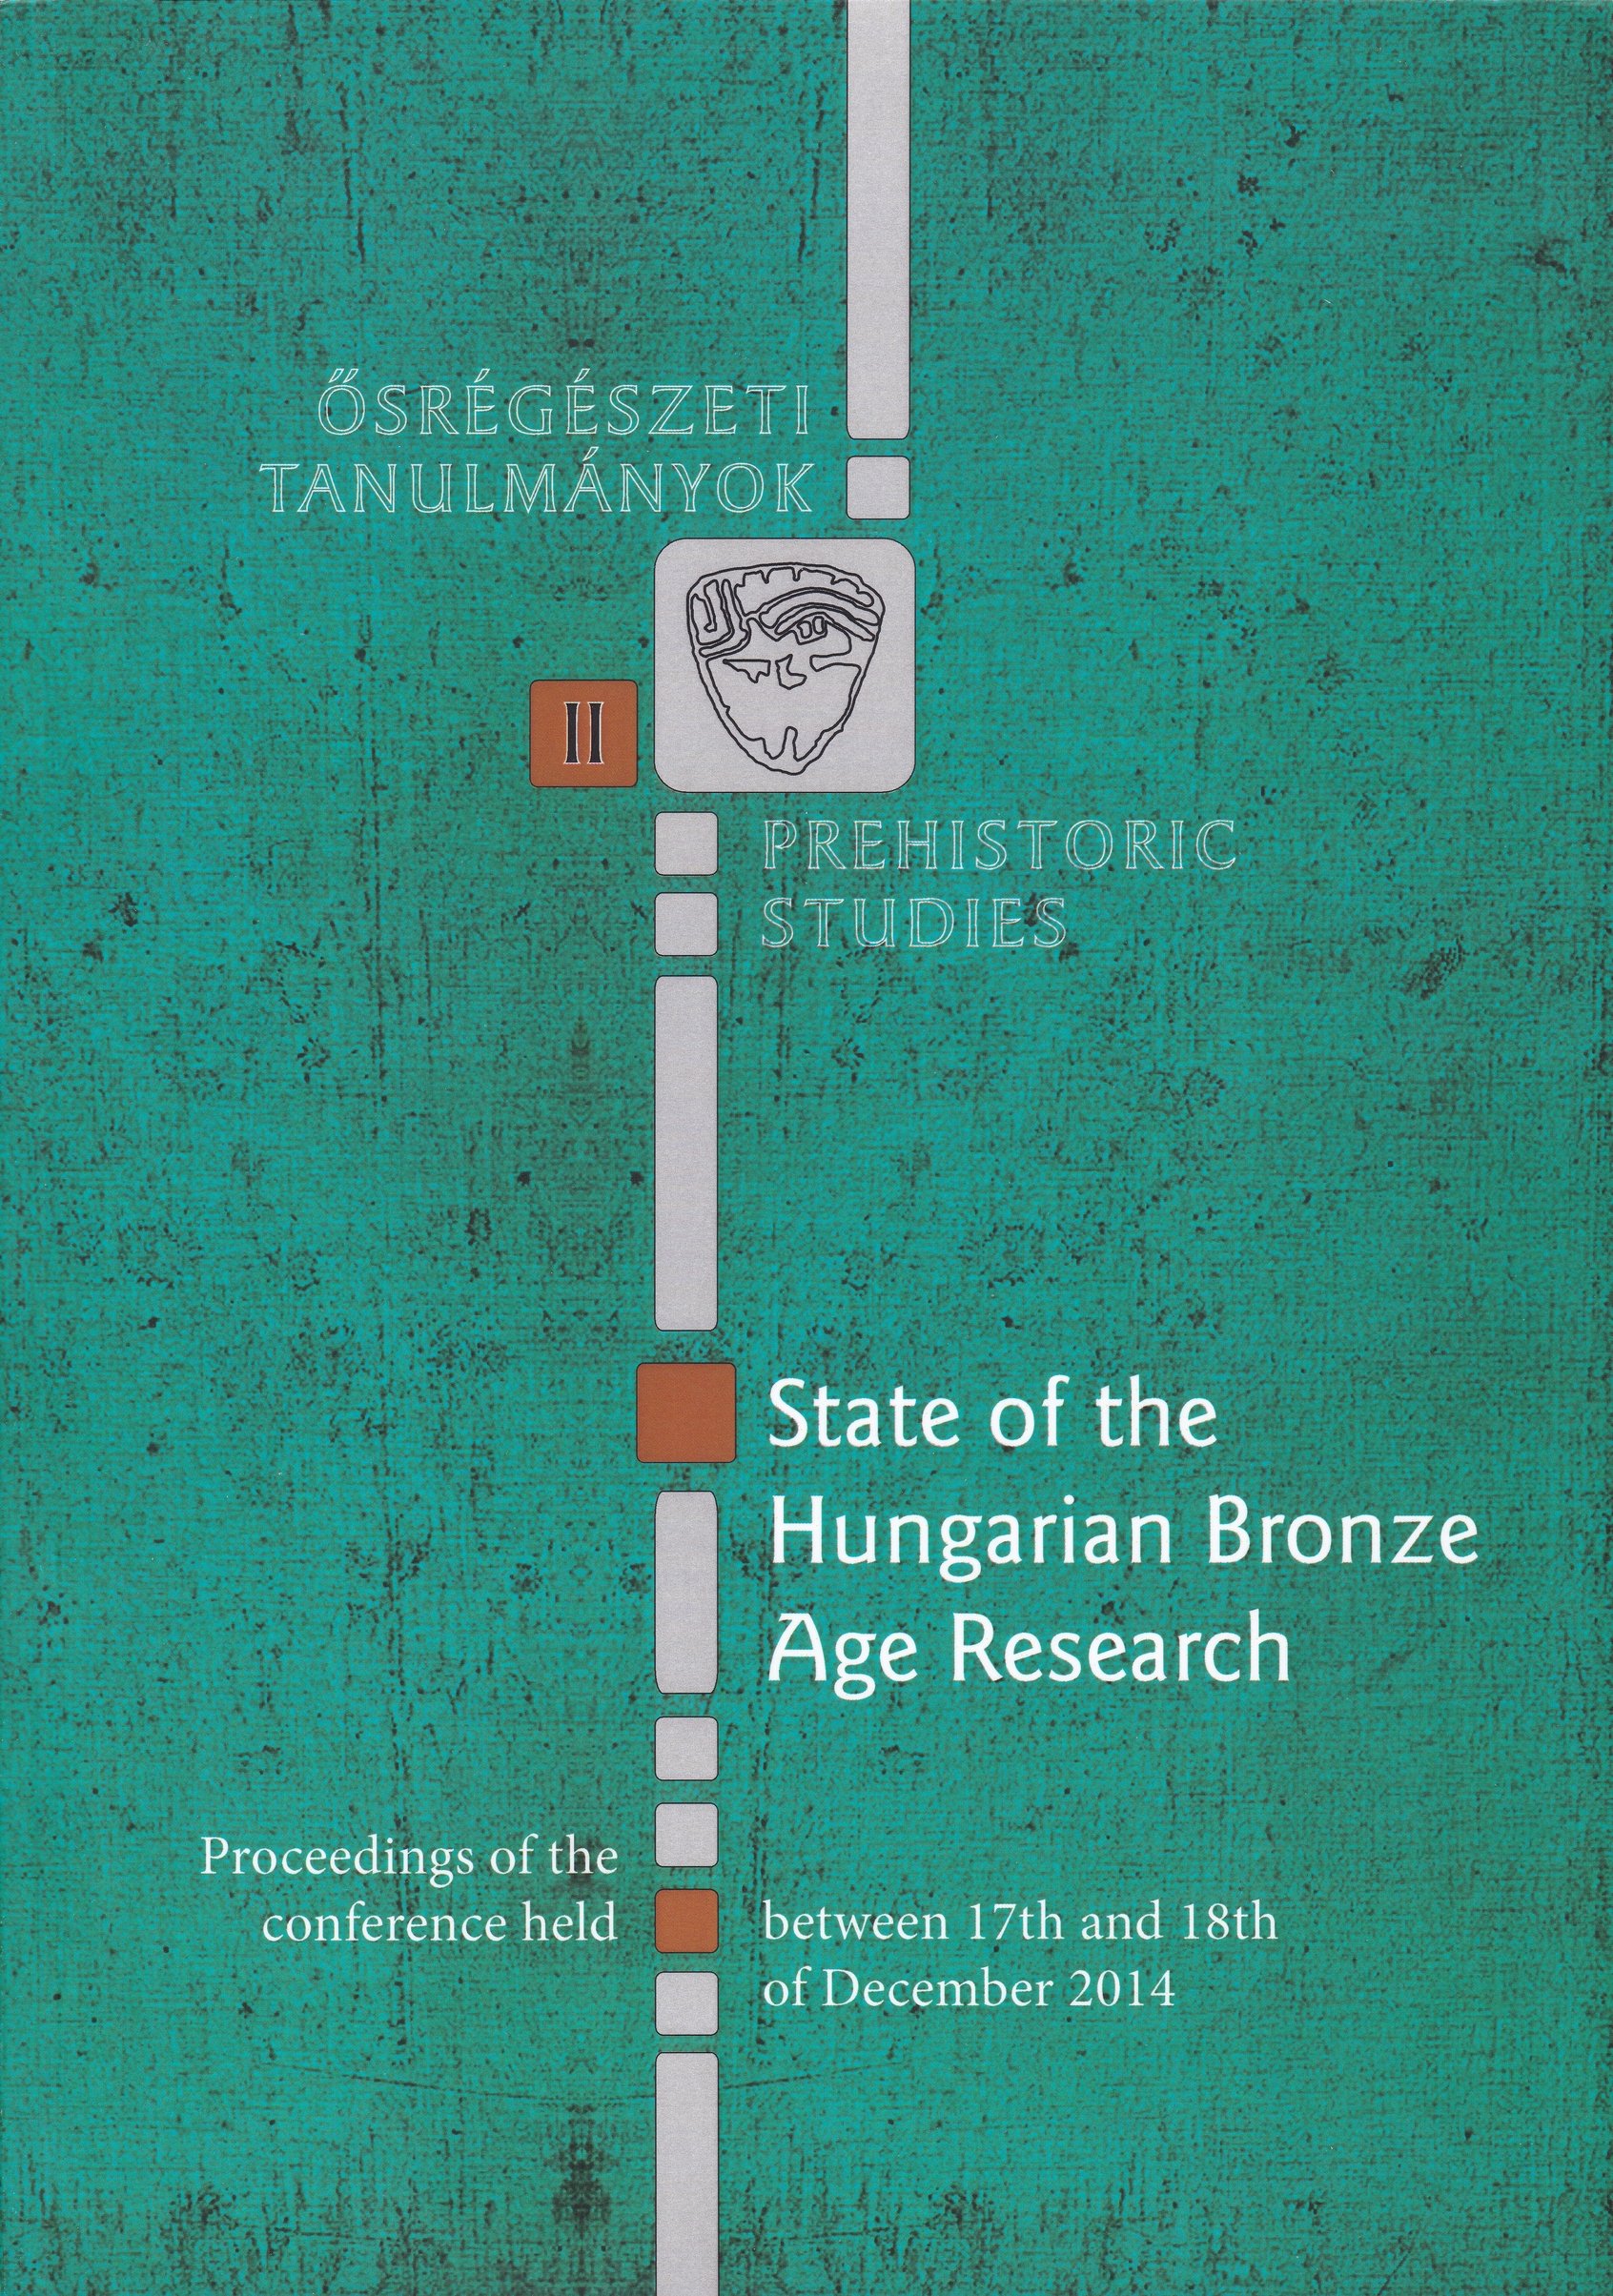 State of the Hungarian Bronze Age Reserach (Rippl-Rónai Múzeum CC BY-NC-ND)